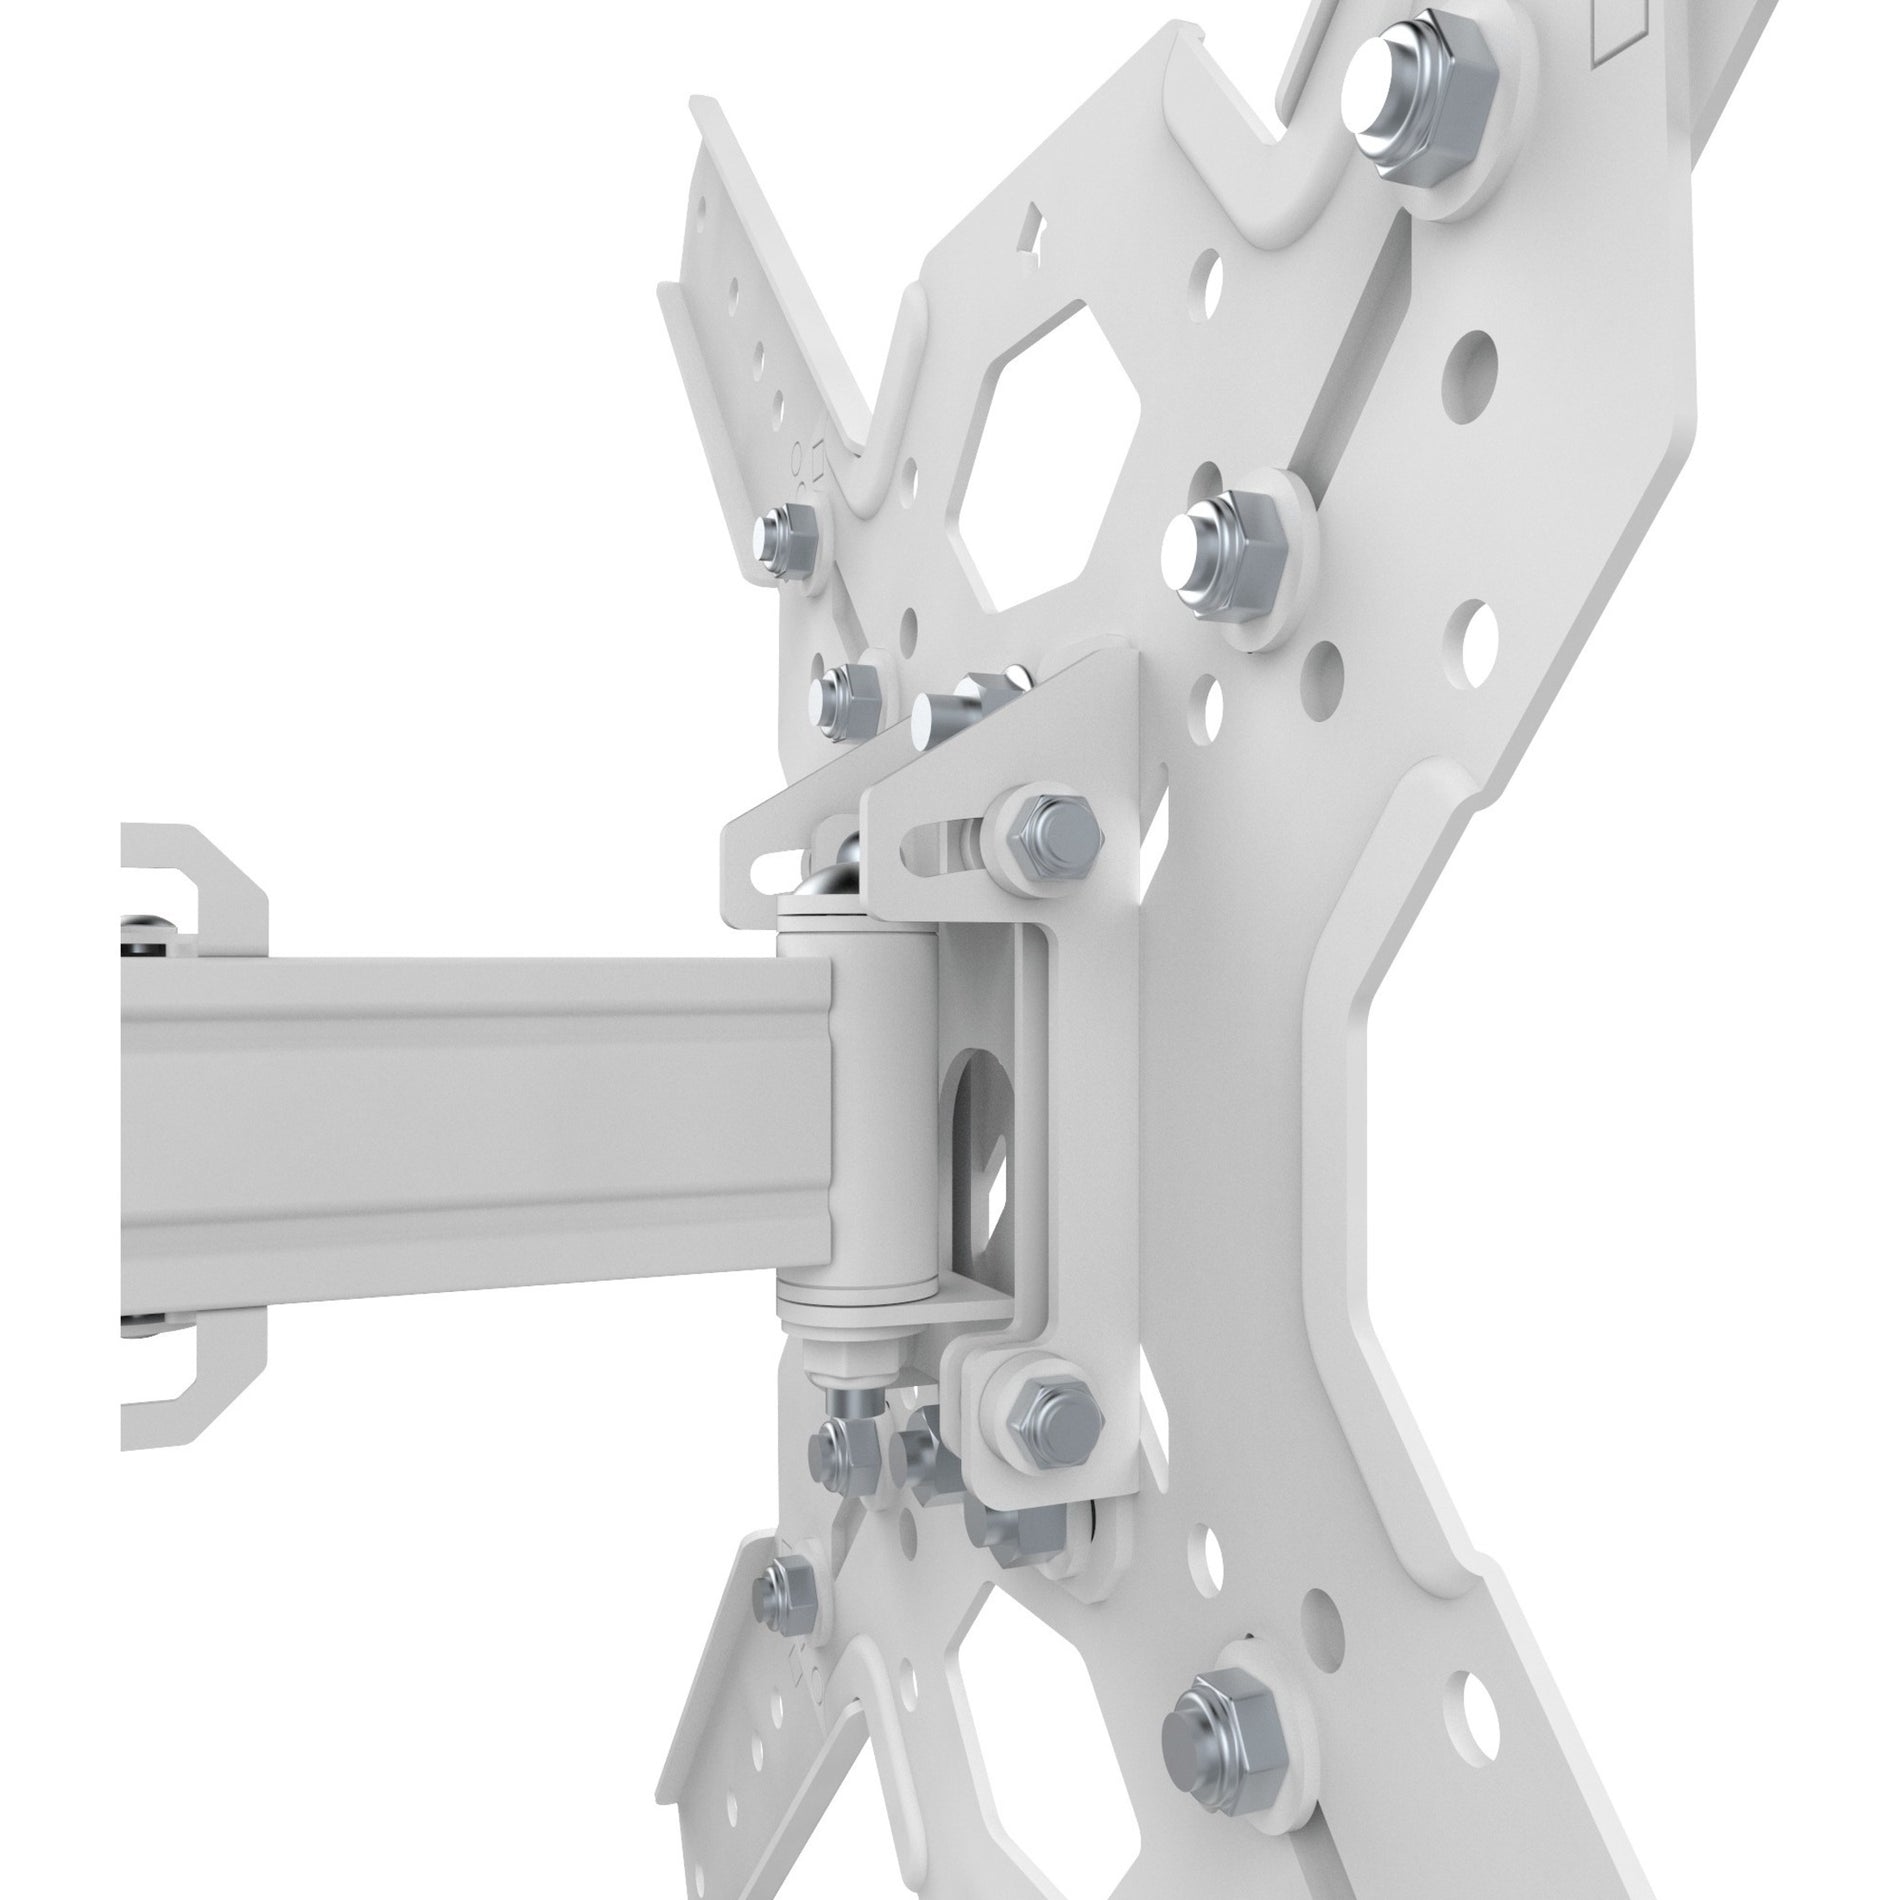 Kanto Full Motion TV Mount - White [Discontinued]